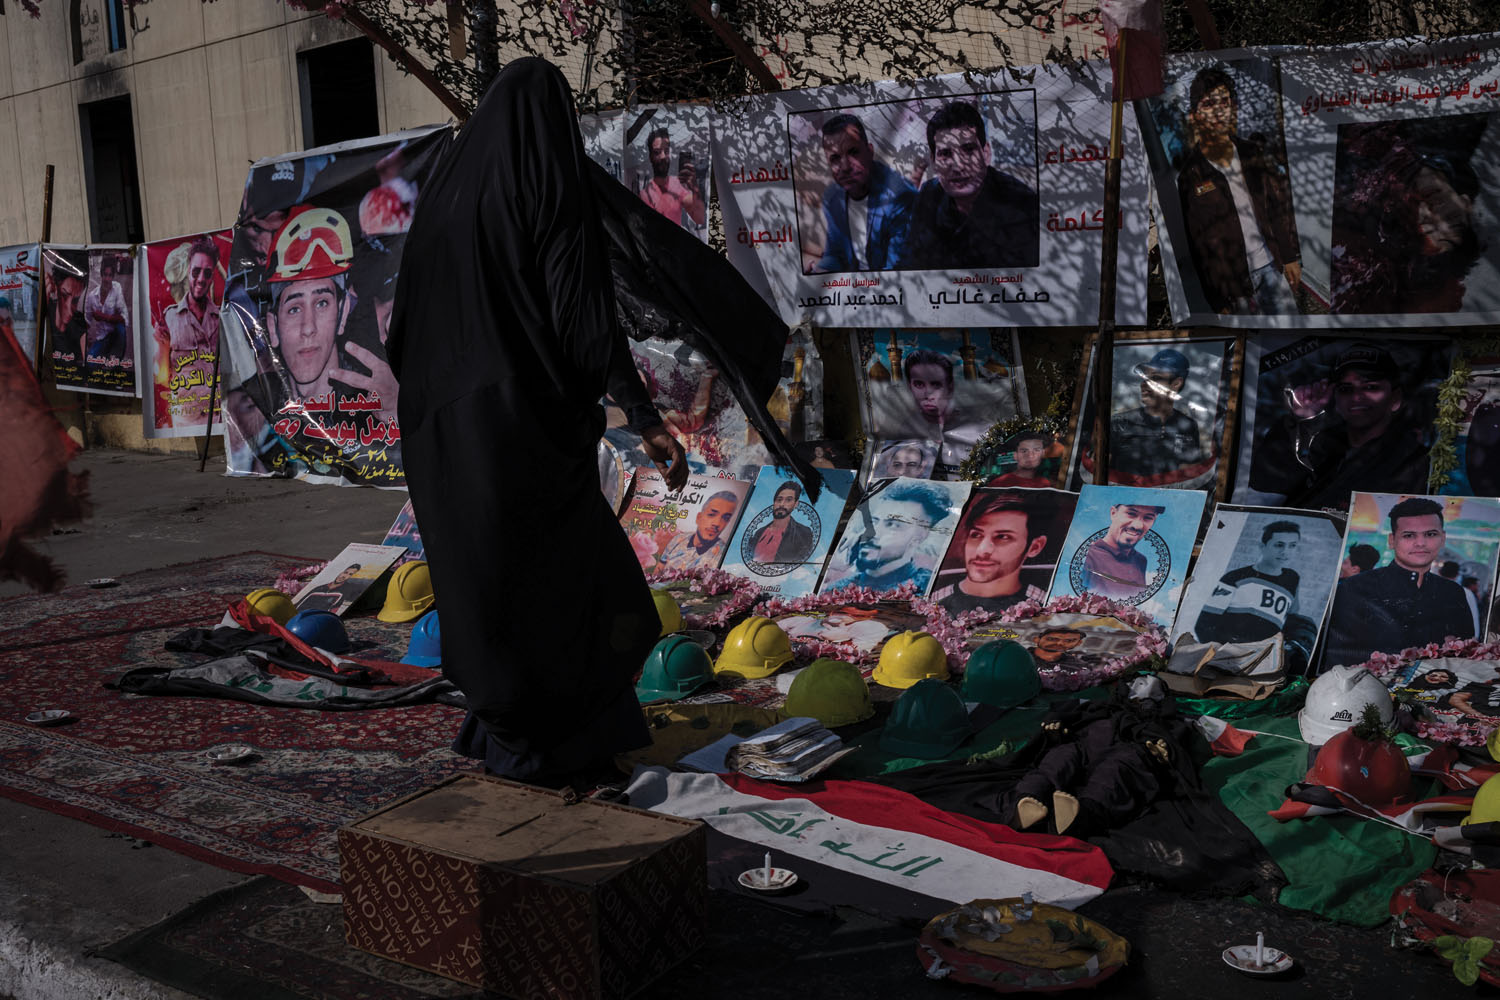 A woman offers prayers amid a makeshift shrine to those who’ve died during the protests.